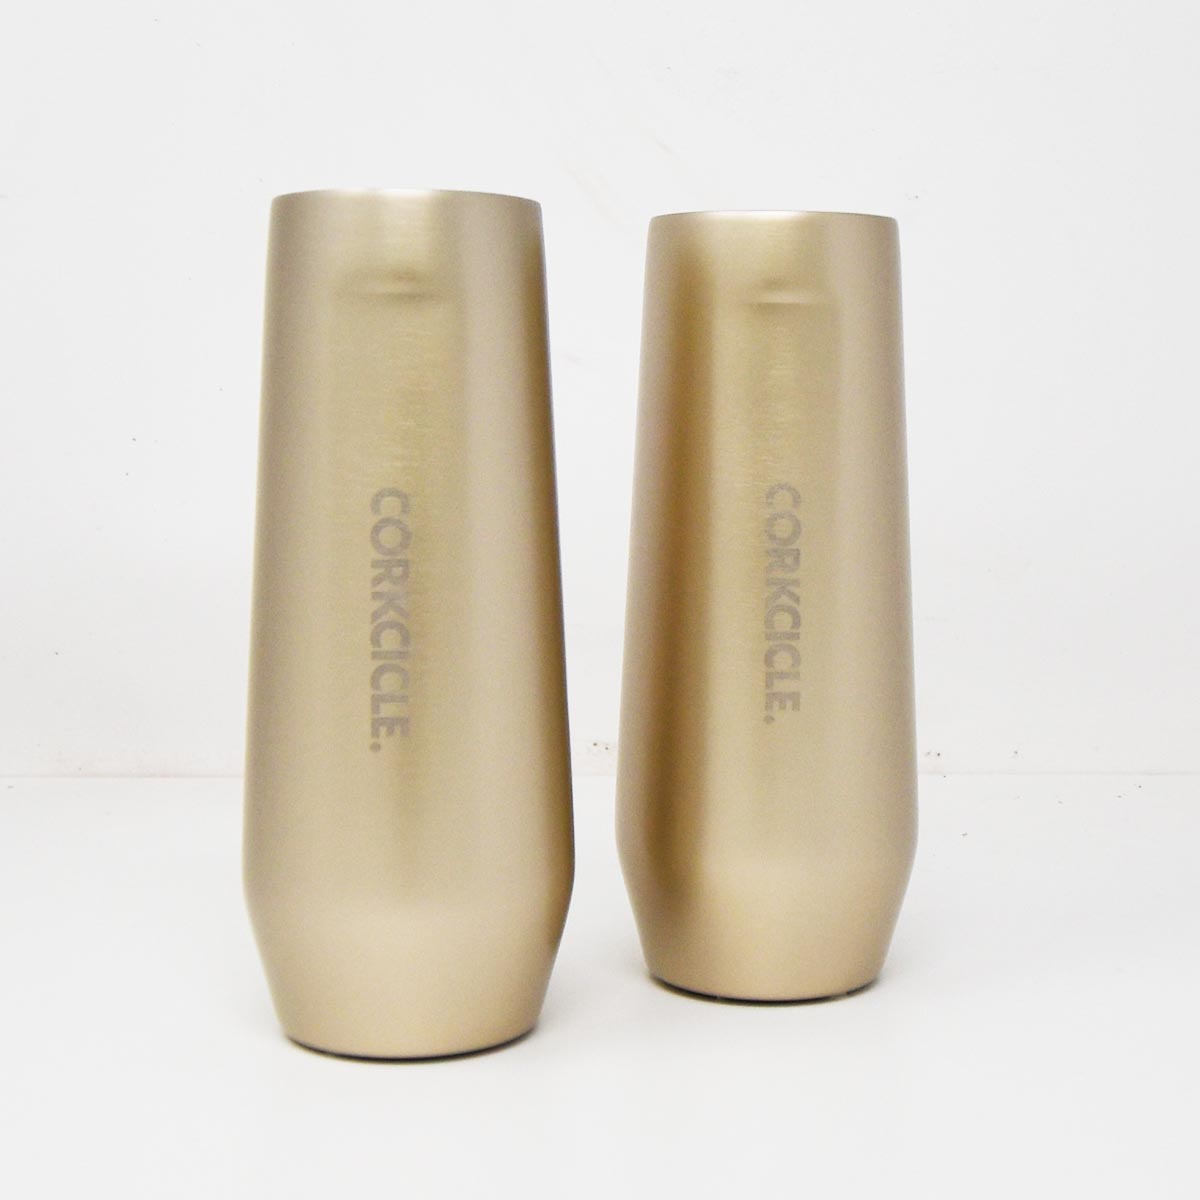 https://www.peacewiththewild.co.uk/wp-content/uploads/2022/11/corkcicle-prosecco-flutes-01.jpg